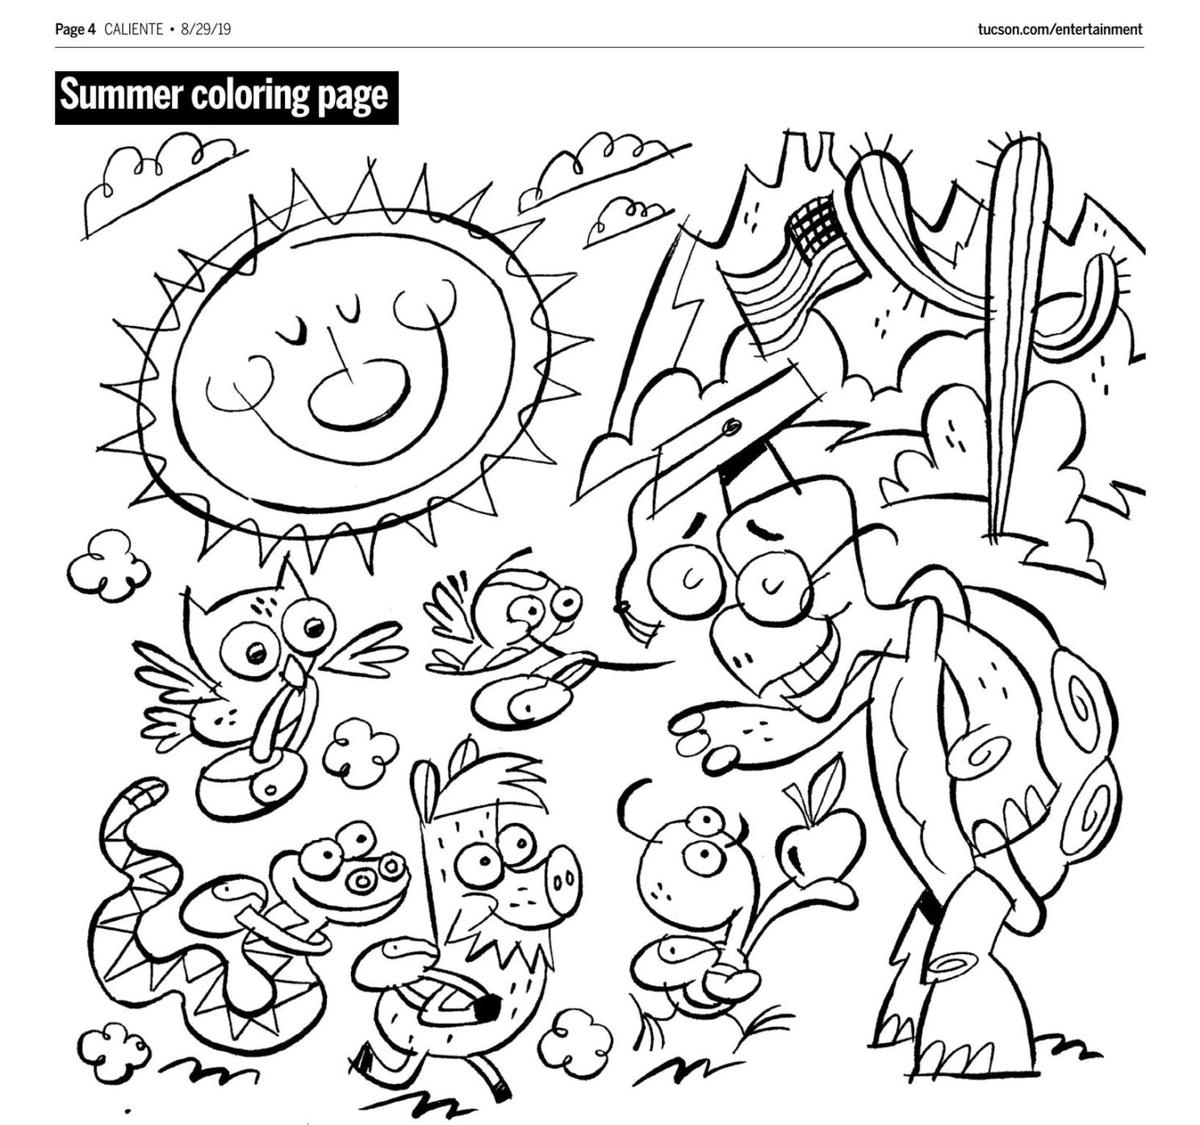 Aug. 30 coloring page